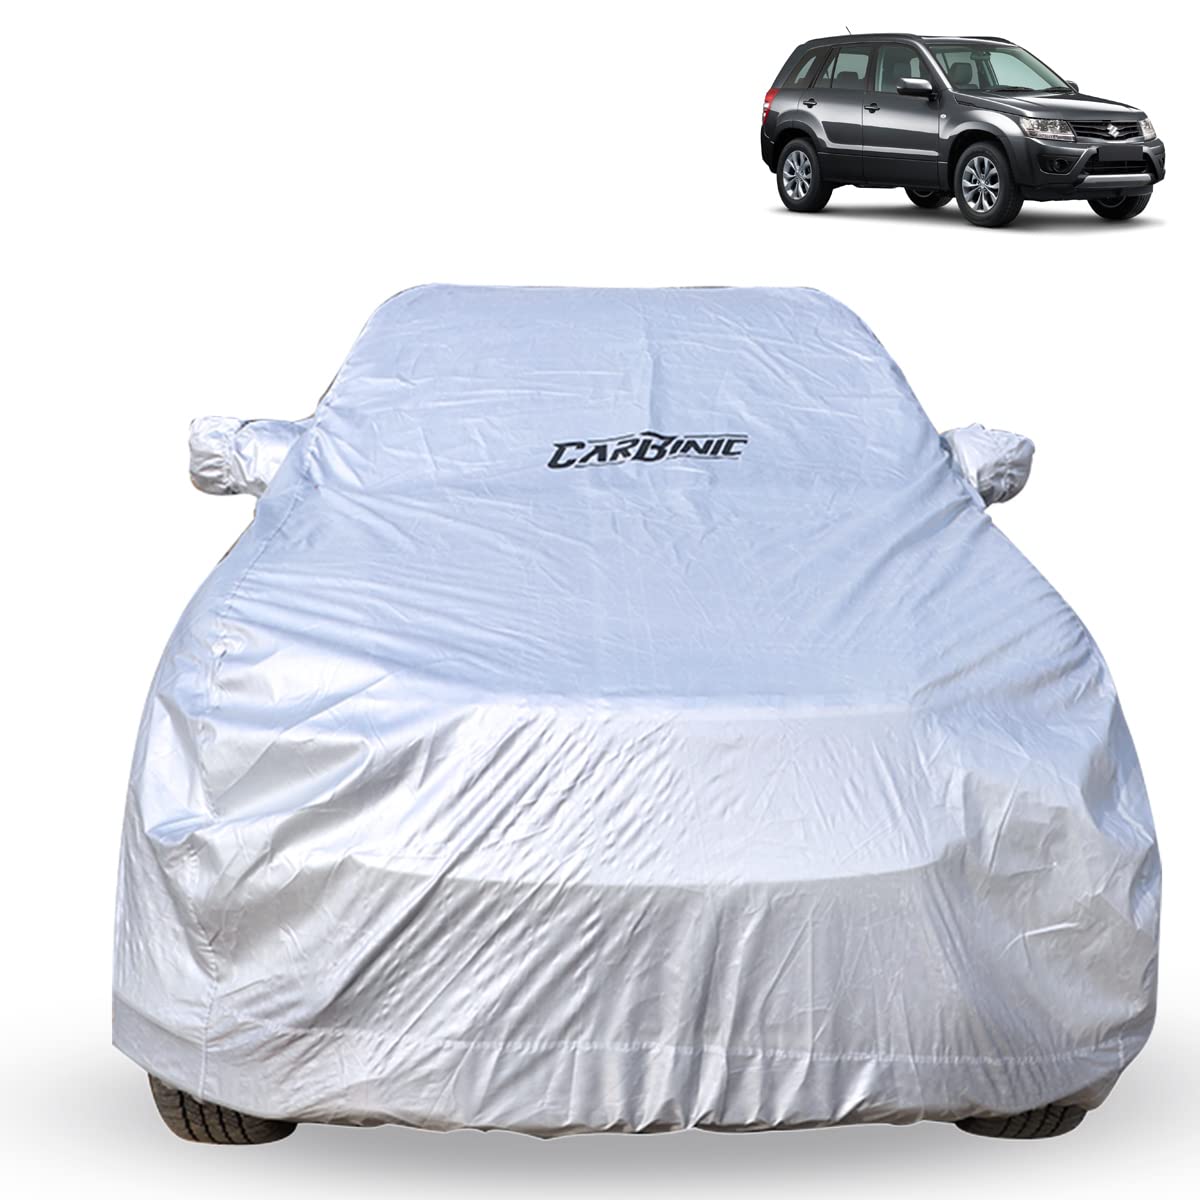 CARBINIC Car Body Cover for Maruti Grand Vitara 2022 | Water Resistant, UV Protection | Scratchproof Body Shield | Dustproof All-Weather Cover | Mirror Pocket & Antenna | Car Accessories, Silver